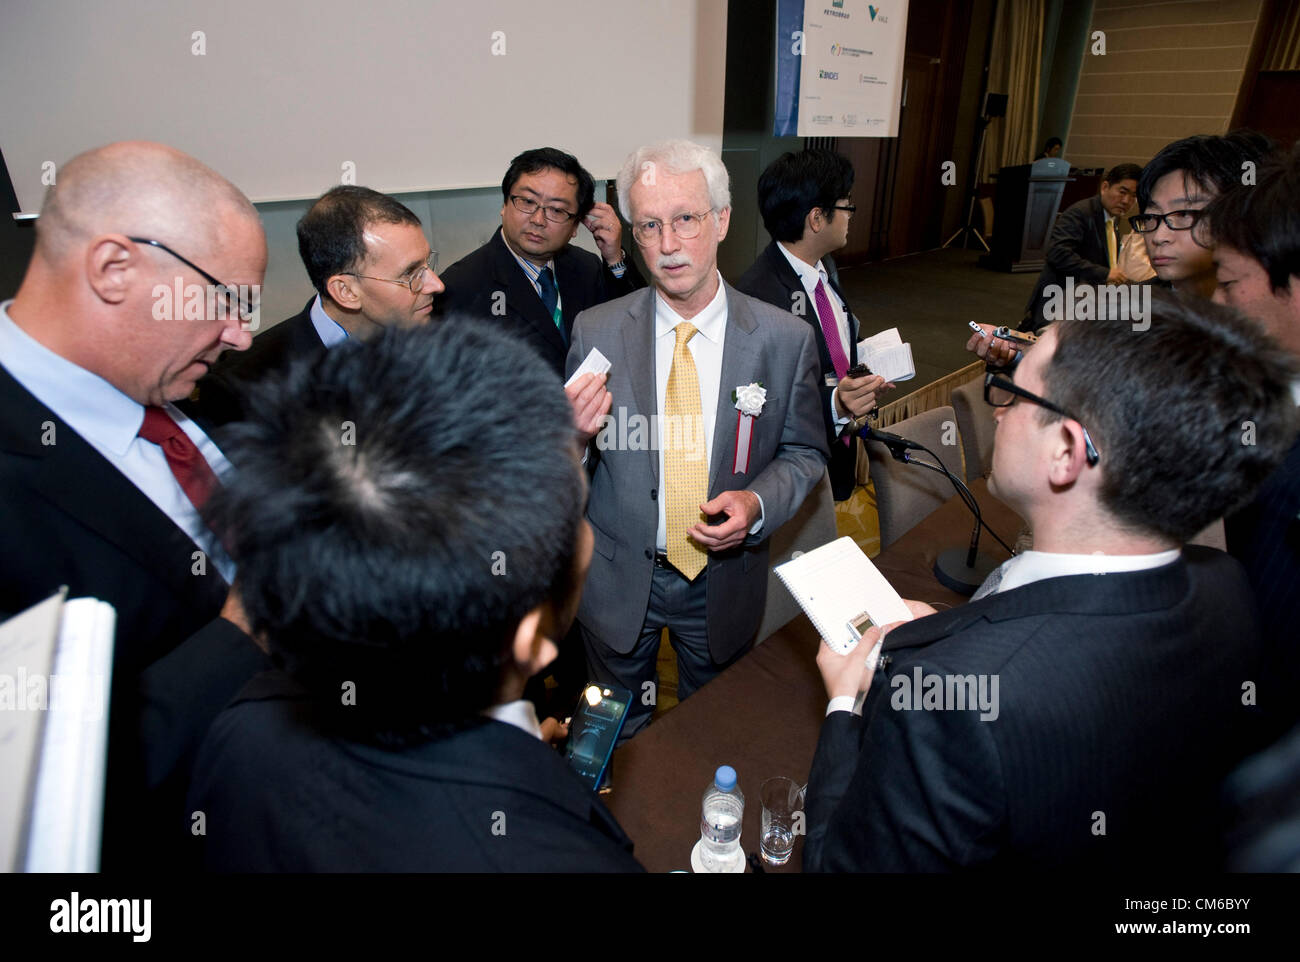 Almir Barbassa, CFO of Petrobras, speaks to journalists following his speech at the Brazil Economic Conference in Tokyo, Japan on 11 Oct. 2012. Stock Photo